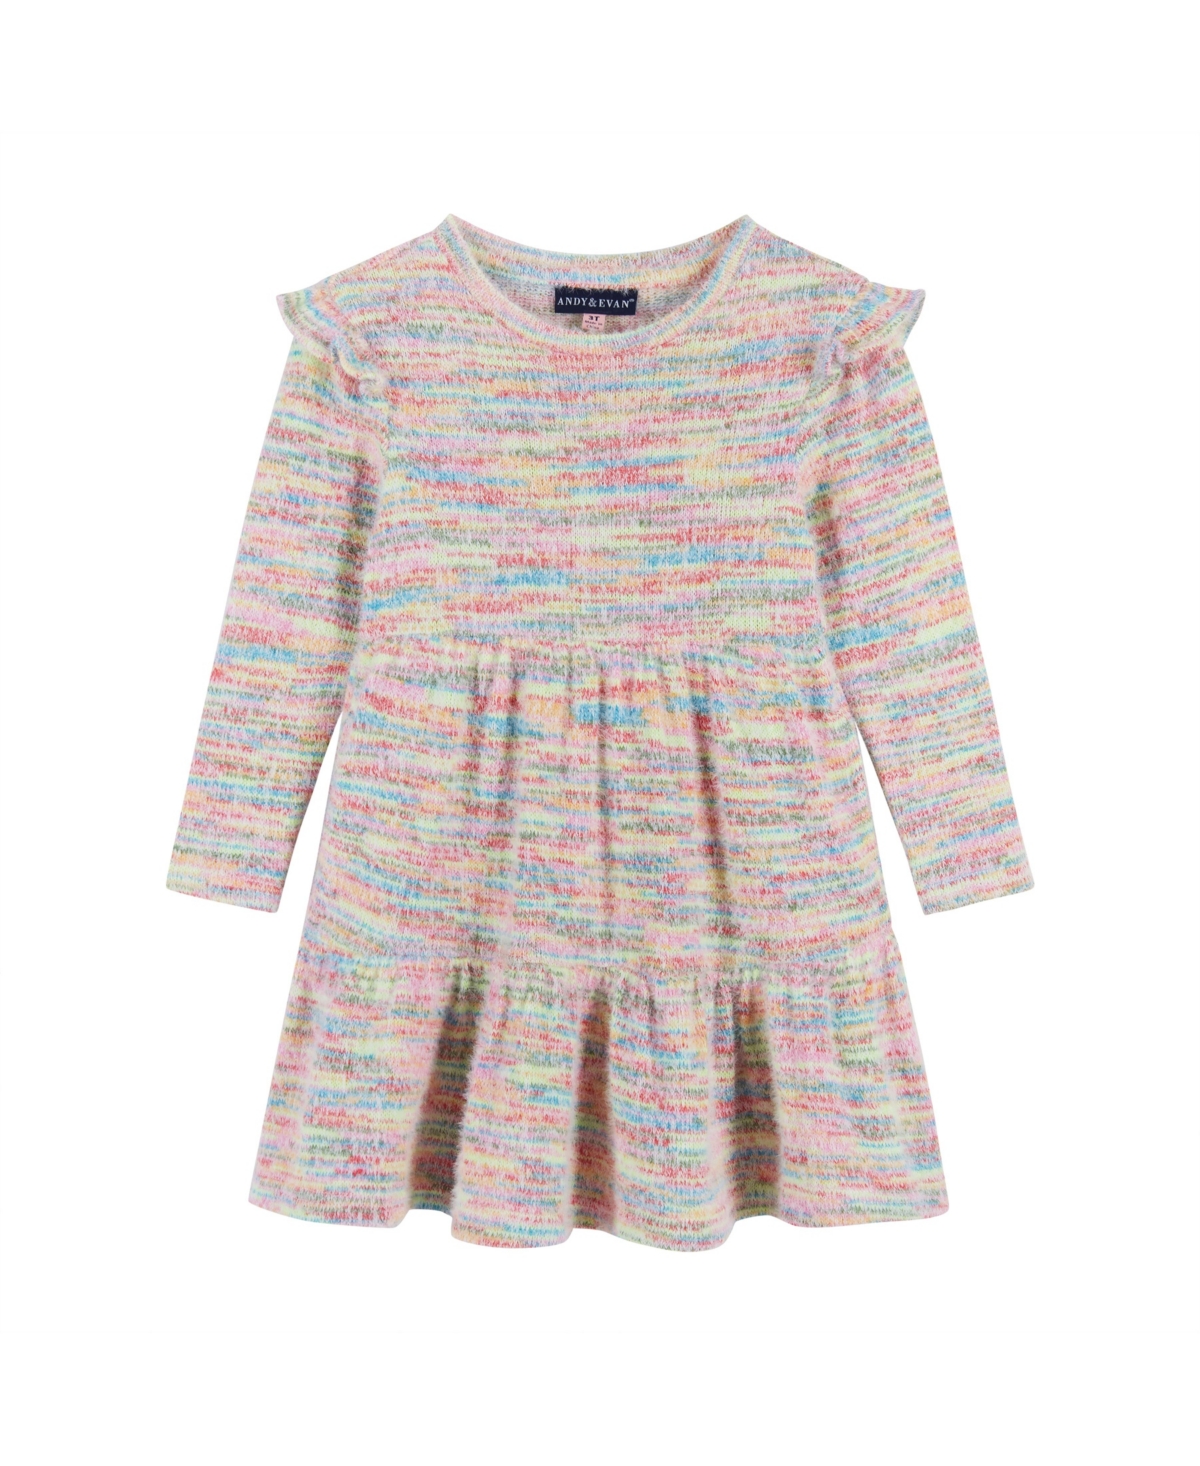 Andy & Evan Toddler/child Girls Multicolor Knit Dress In Open Miscellaneous